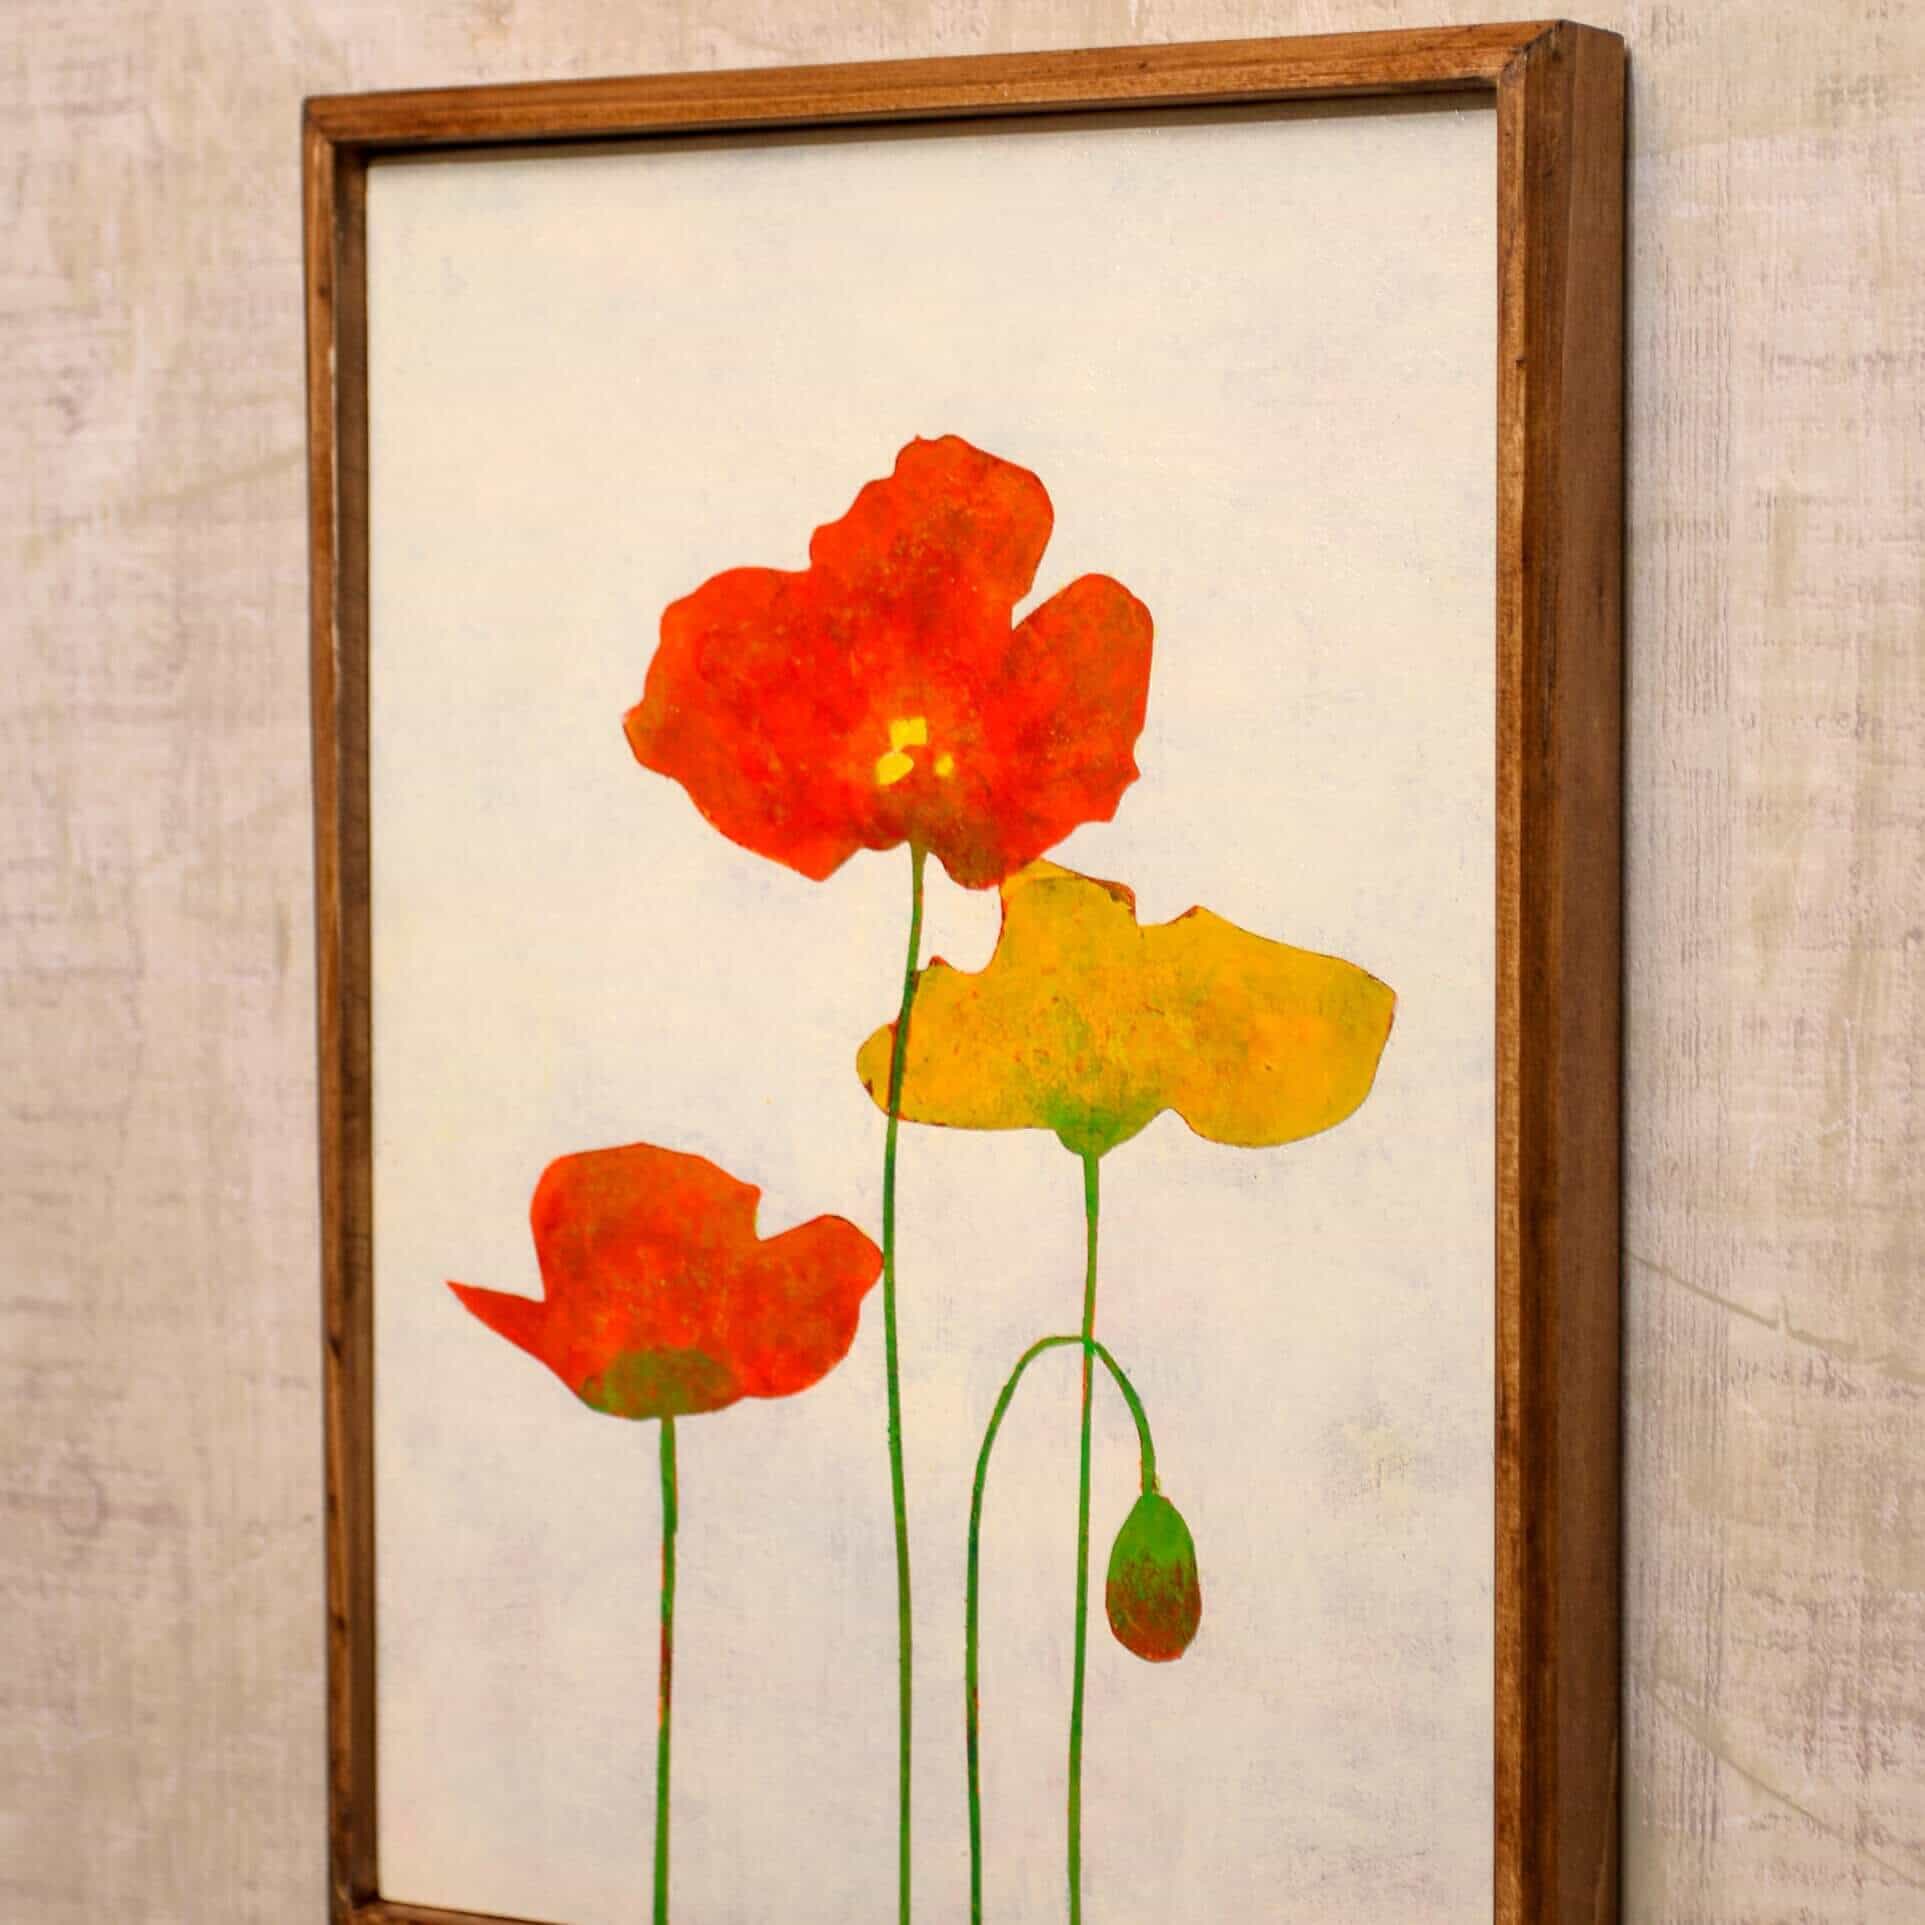 Orange and yellow poppies_A No.186-3